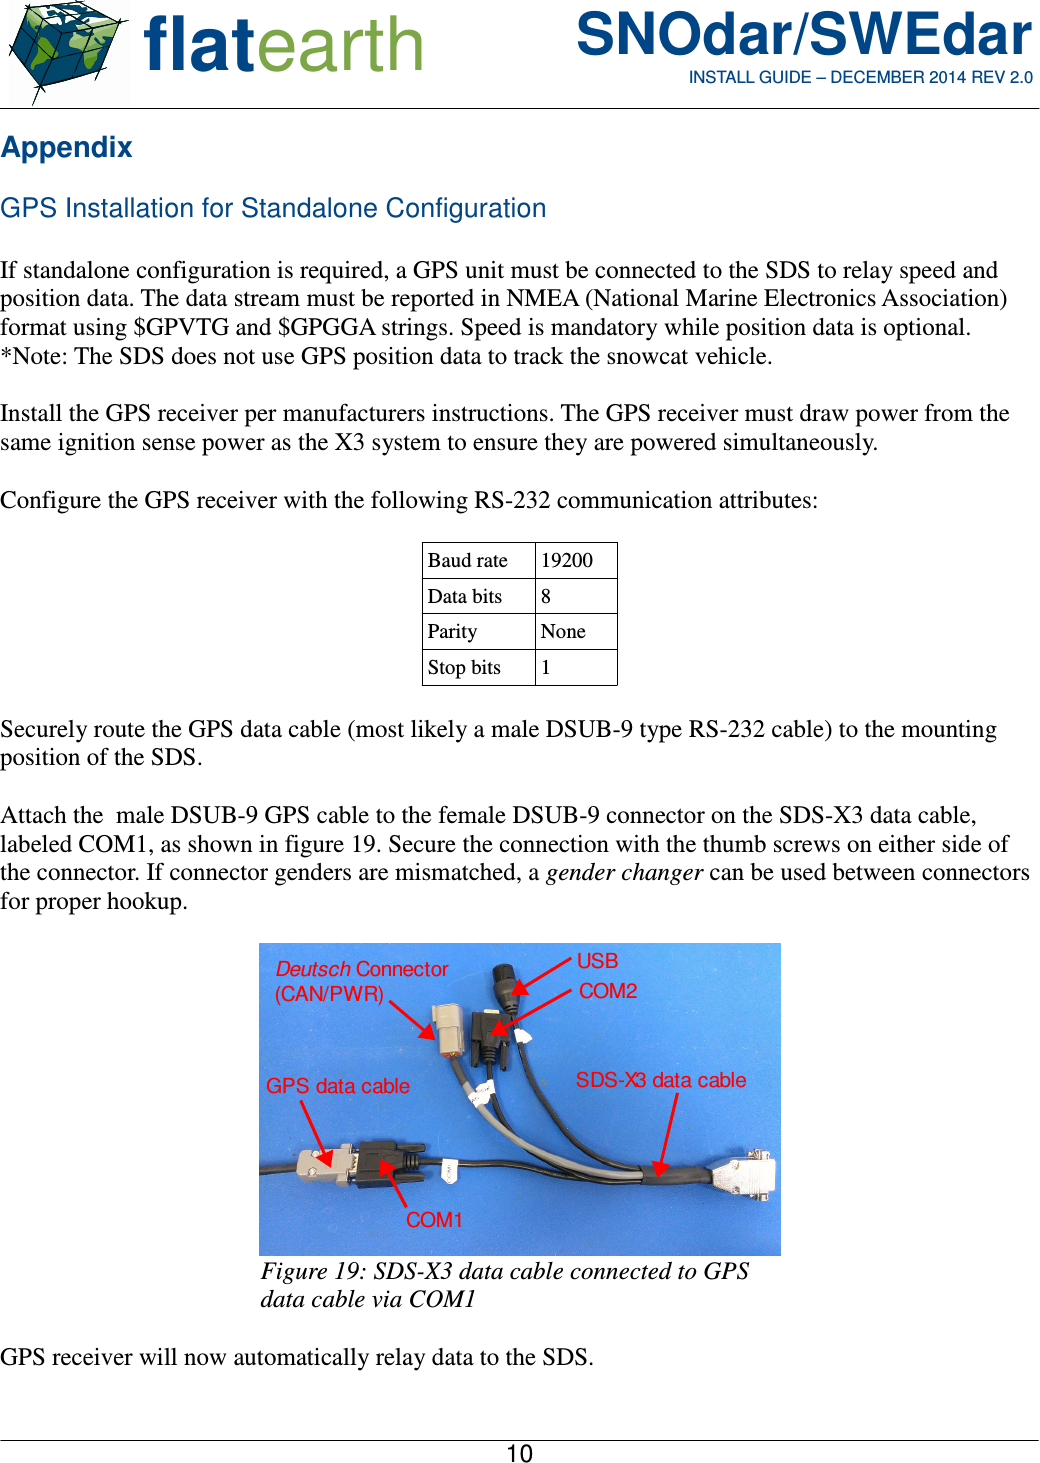  flatearth SNOdar/SWEdarINSTALL GUIDE – DECEMBER 2014 REV 2.0AppendixGPS Installation for Standalone ConfigurationIf standalone configuration is required, a GPS unit must be connected to the SDS to relay speed andposition data. The data stream must be reported in NMEA (National Marine Electronics Association)format using $GPVTG and $GPGGA strings. Speed is mandatory while position data is optional.*Note: The SDS does not use GPS position data to track the snowcat vehicle.Install the GPS receiver per manufacturers instructions. The GPS receiver must draw power from thesame ignition sense power as the X3 system to ensure they are powered simultaneously.Configure the GPS receiver with the following RS-232 communication attributes:Baud rate 19200Data bits 8Parity NoneStop bits 1Securely route the GPS data cable (most likely a male DSUB-9 type RS-232 cable) to the mountingposition of the SDS.Attach the  male DSUB-9 GPS cable to the female DSUB-9 connector on the SDS-X3 data cable,labeled COM1, as shown in figure 19. Secure the connection with the thumb screws on either side ofthe connector. If connector genders are mismatched, a gender changer can be used between connectorsfor proper hookup.  GPS receiver will now automatically relay data to the SDS.10Figure 19: SDS-X3 data cable connected to GPSdata cable via COM1 SDS-X3 data cableGPS data cableCOM1USBCOM2Deutsch Connector (CAN/PWR)